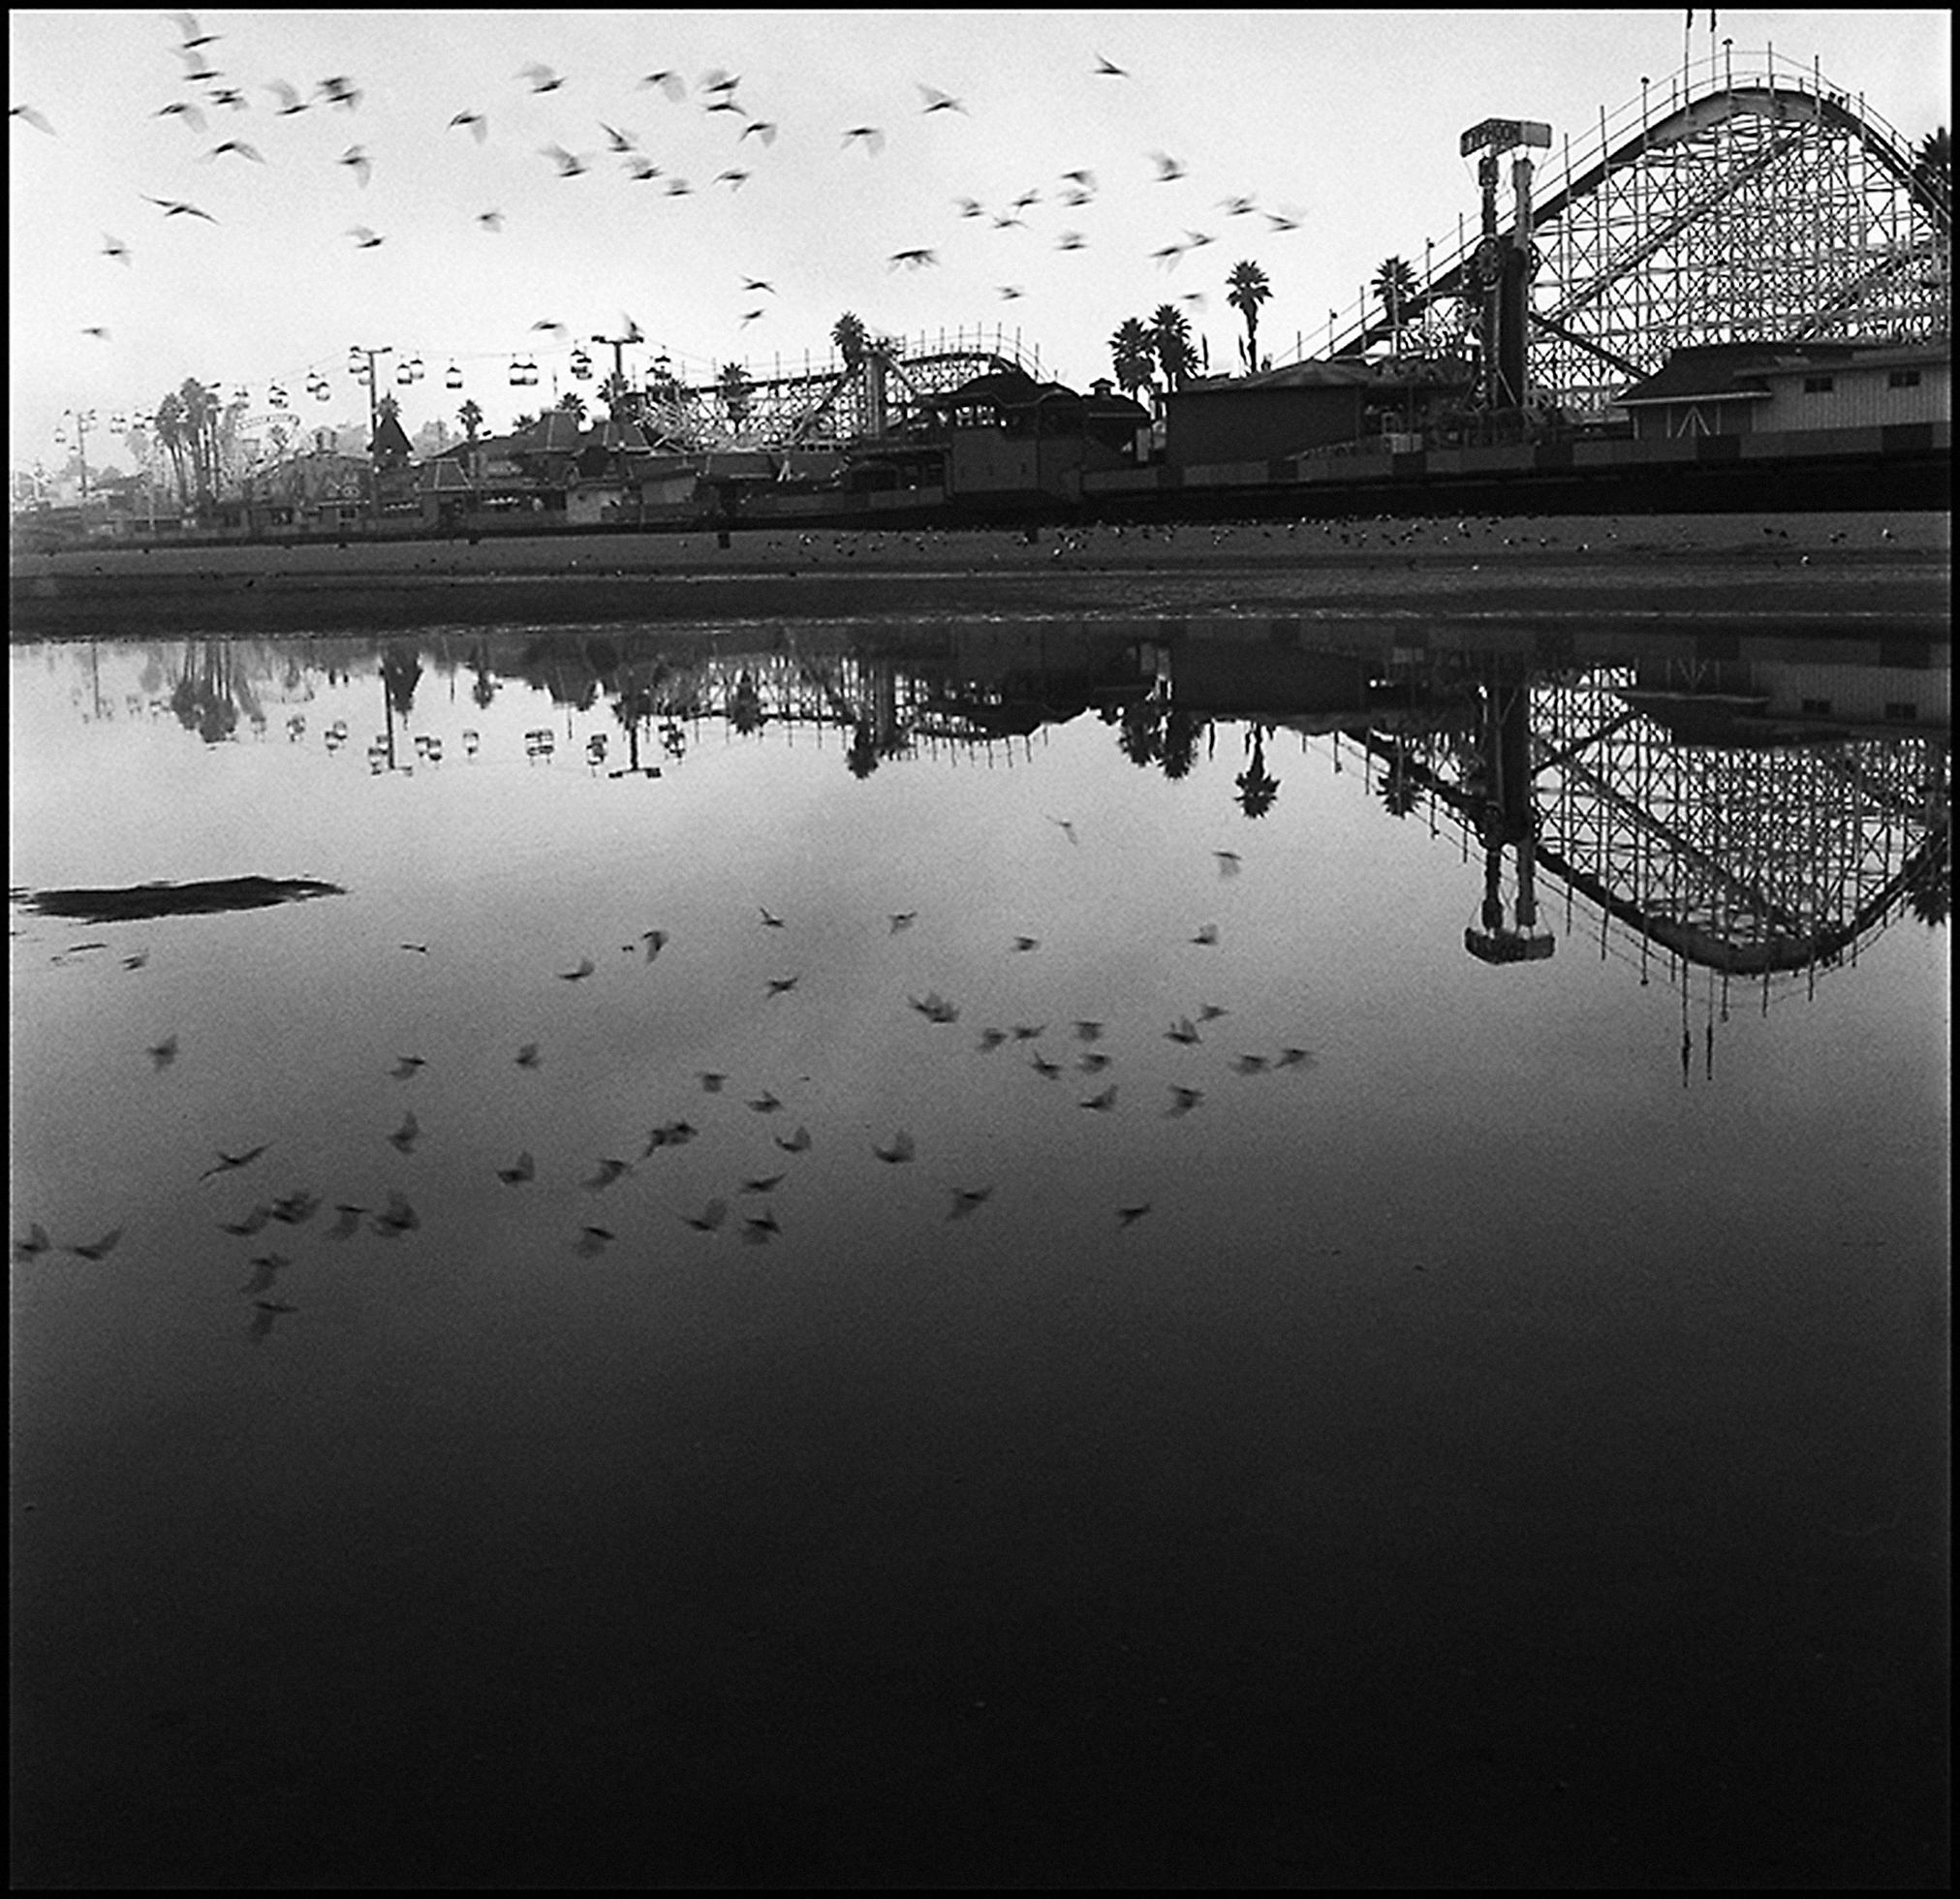 The roller coasters of an amusement park with its palm trees and a flock of birds in the background are reflected in a body of water in the foreground.